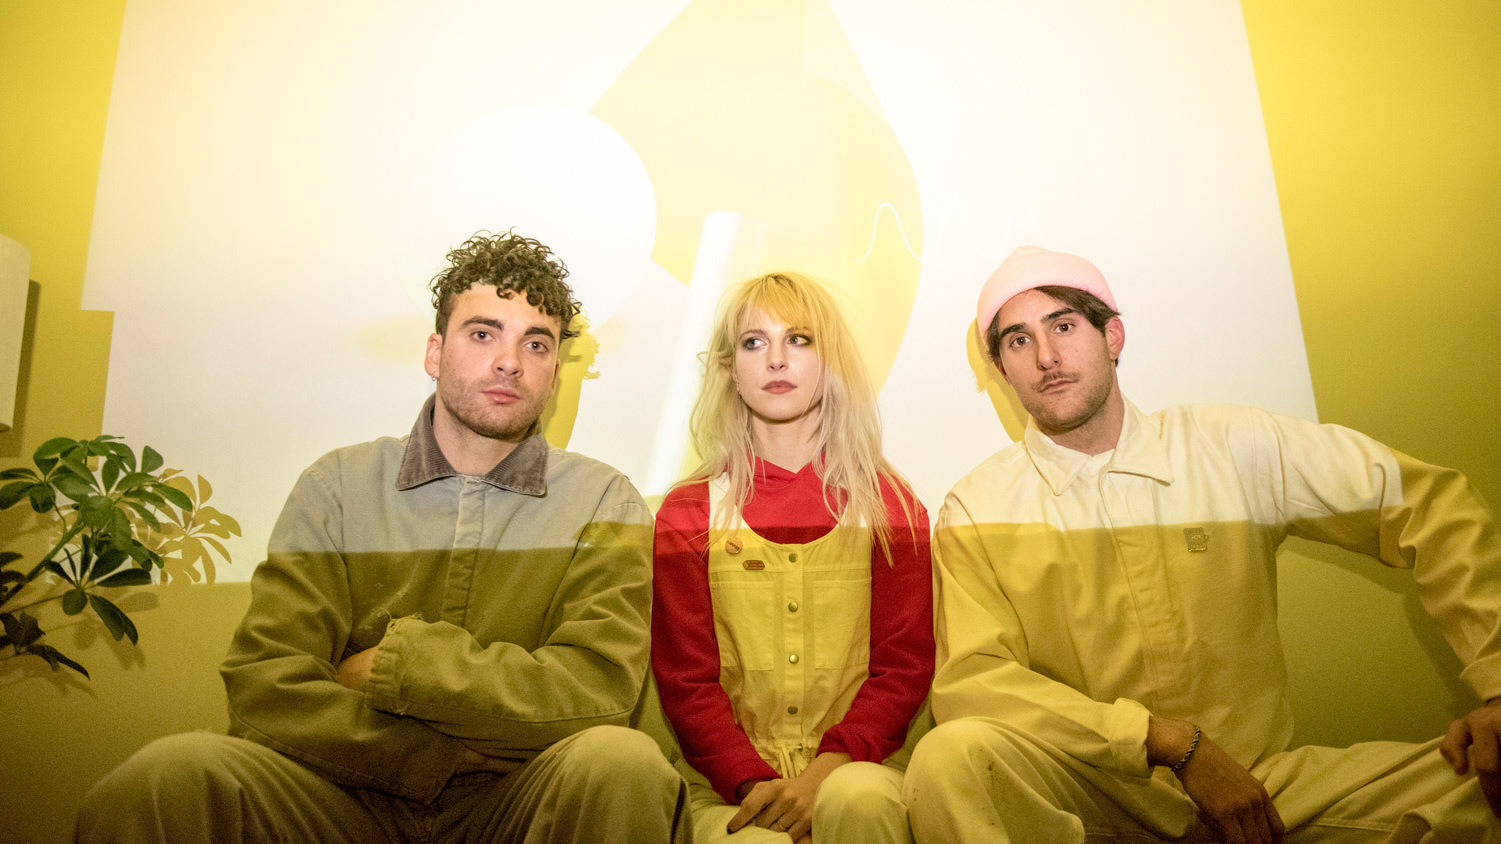 Paramore After Laughter Wallpapers